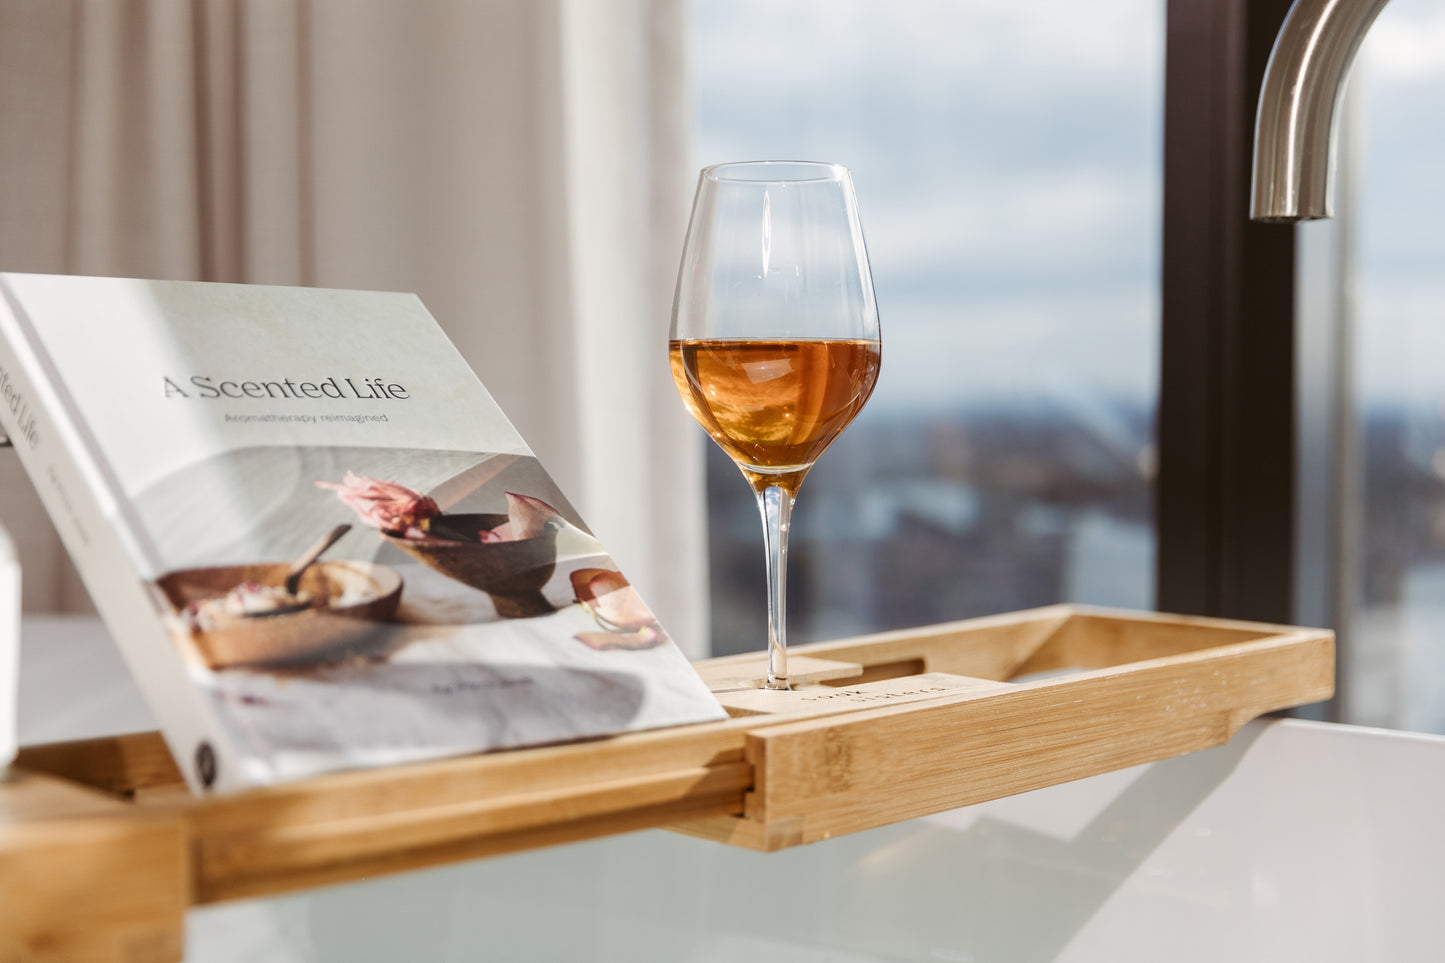 A bath tub with a bamboo caddy across it. On the shelf is a glass of rose wine and a book. The book is titled "A scented life"